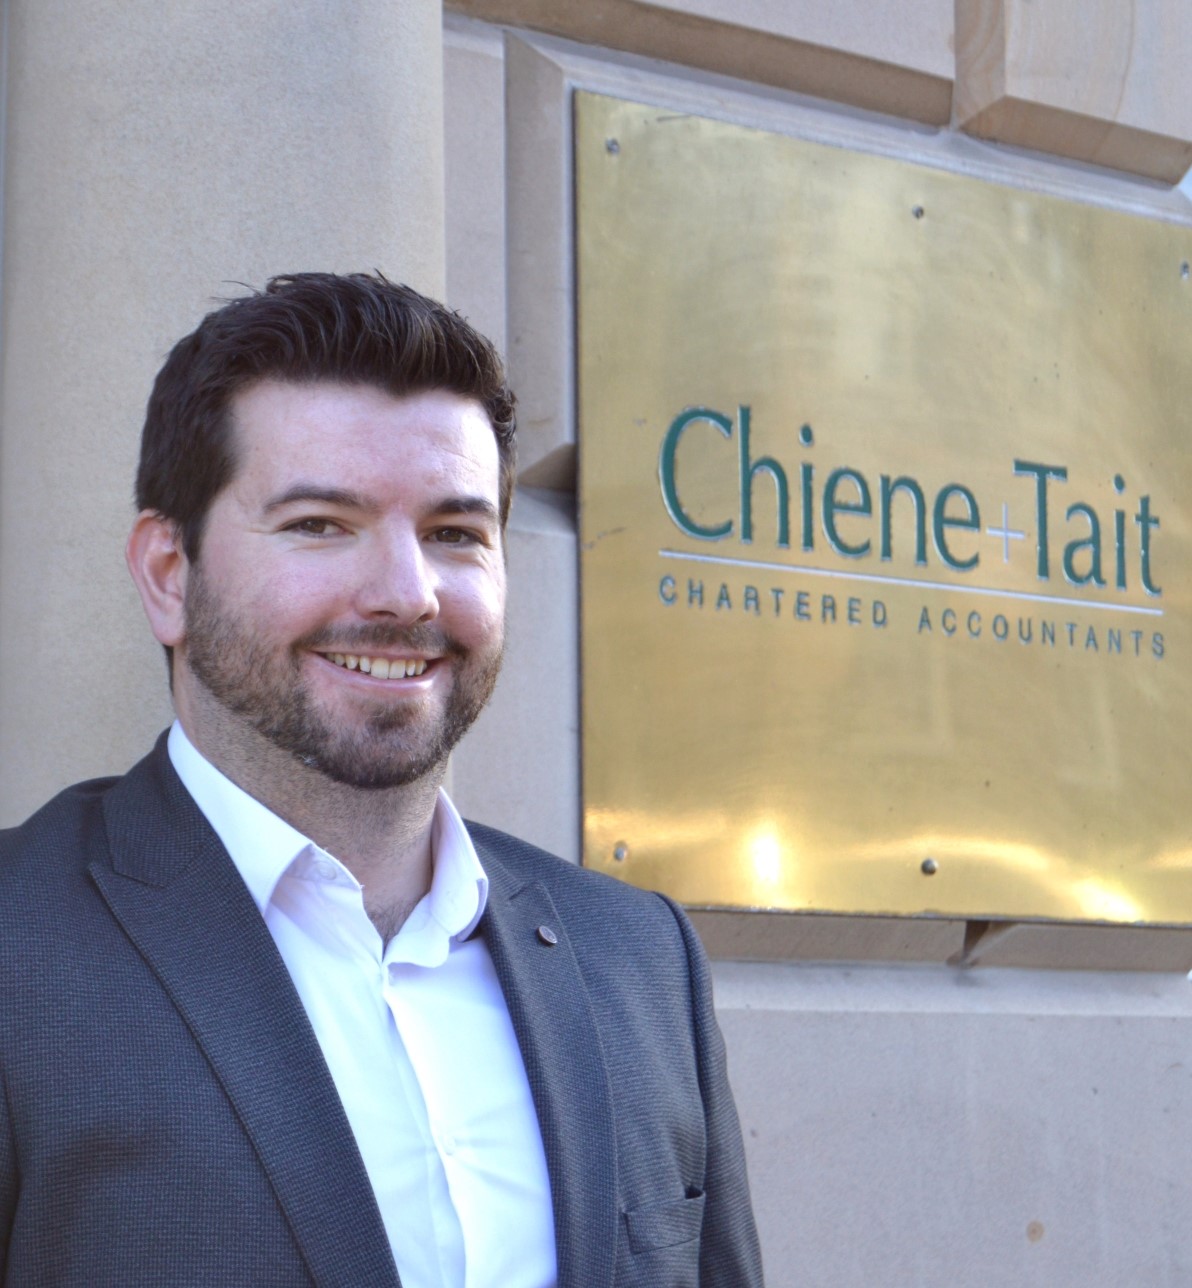 Chiene + Tait and Converge announce new R&D support alliance